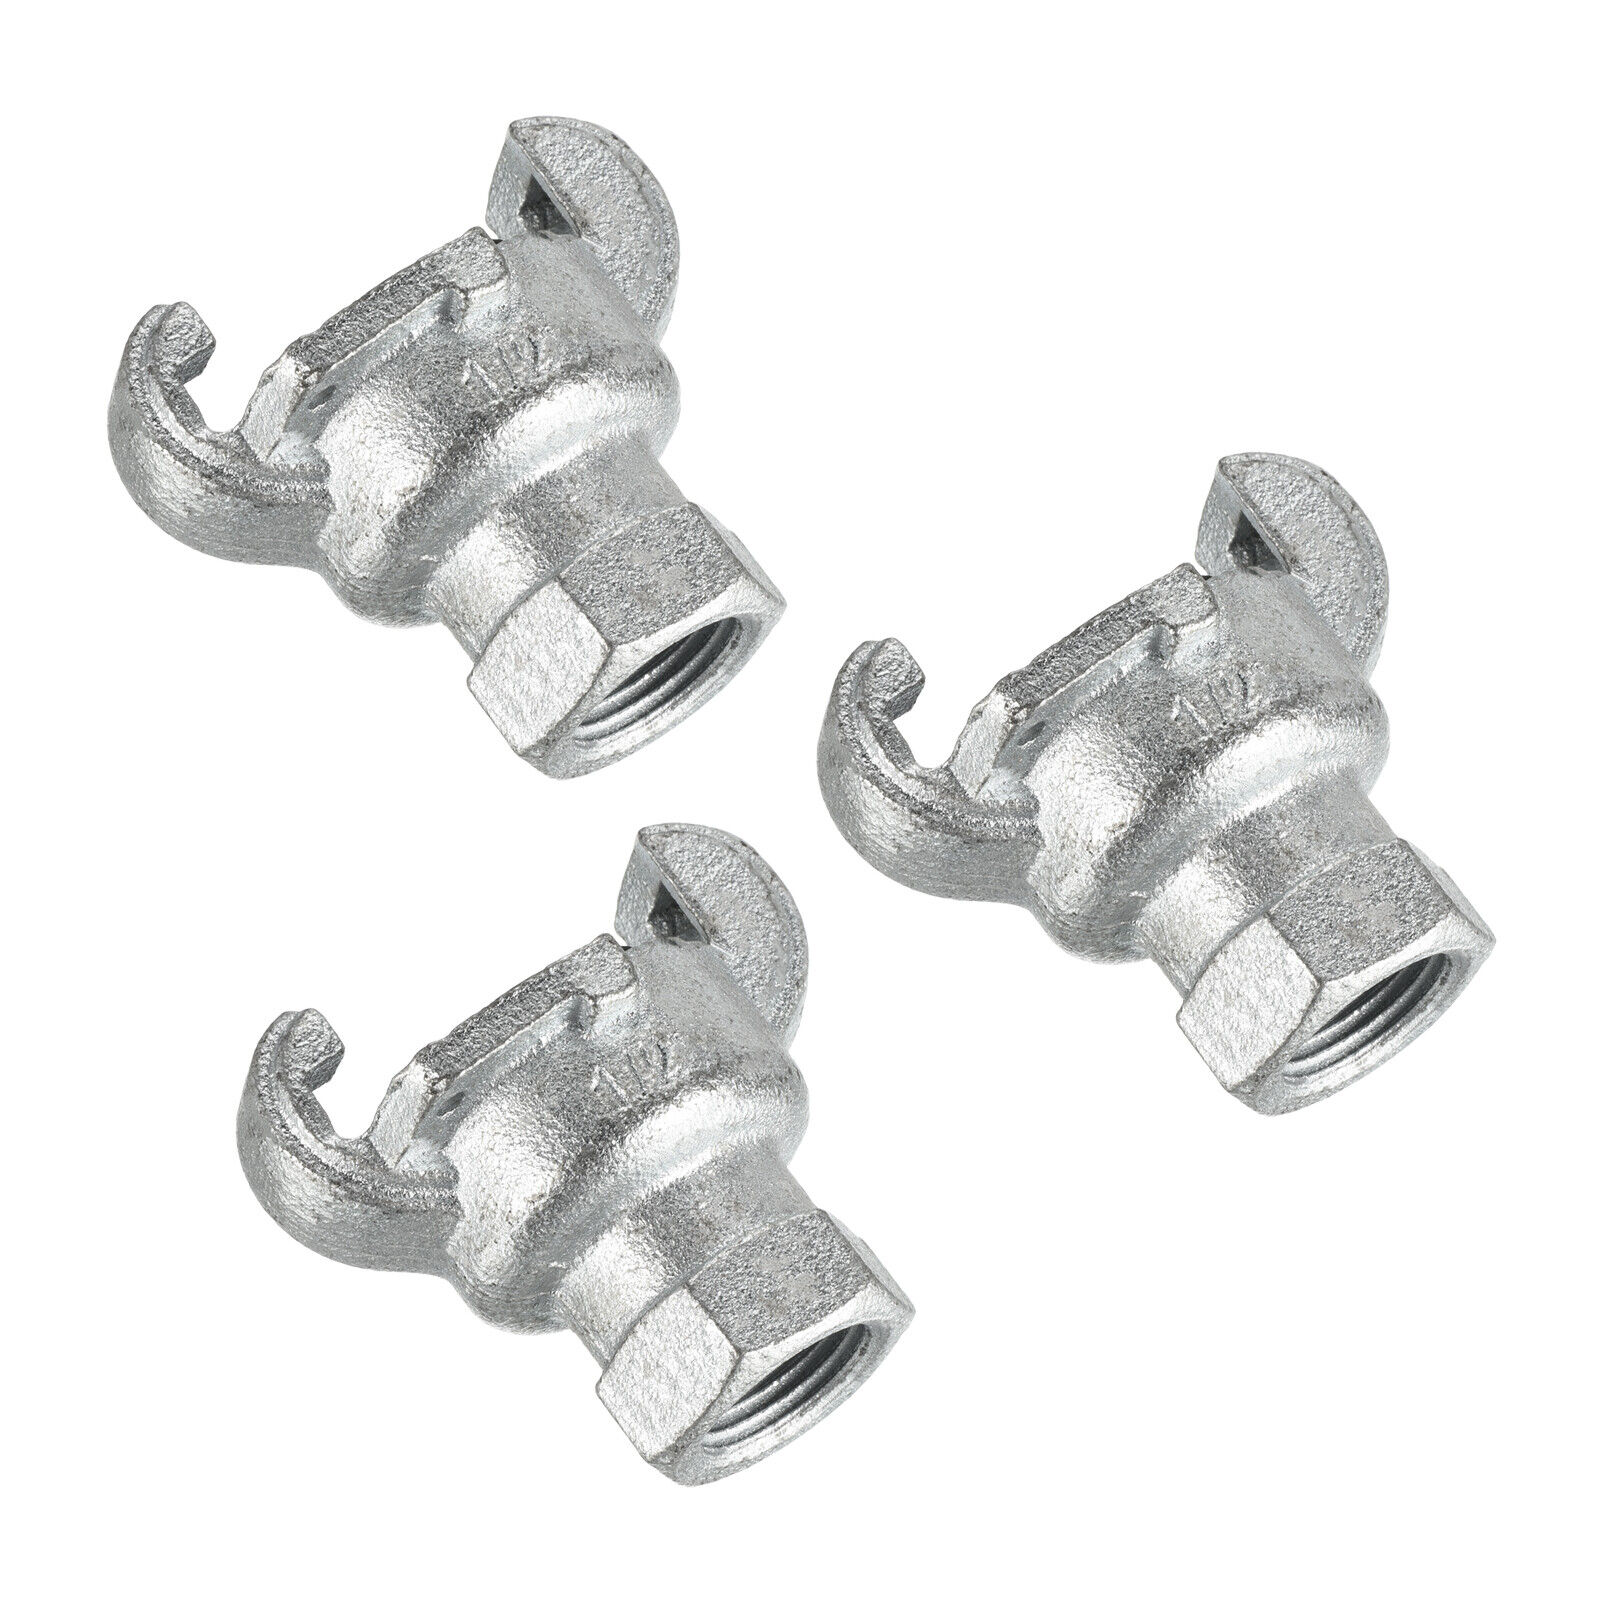 3pcs Air Hose Coupling Fitting 1/2npt Female Thread Claw Quick Connector Silver